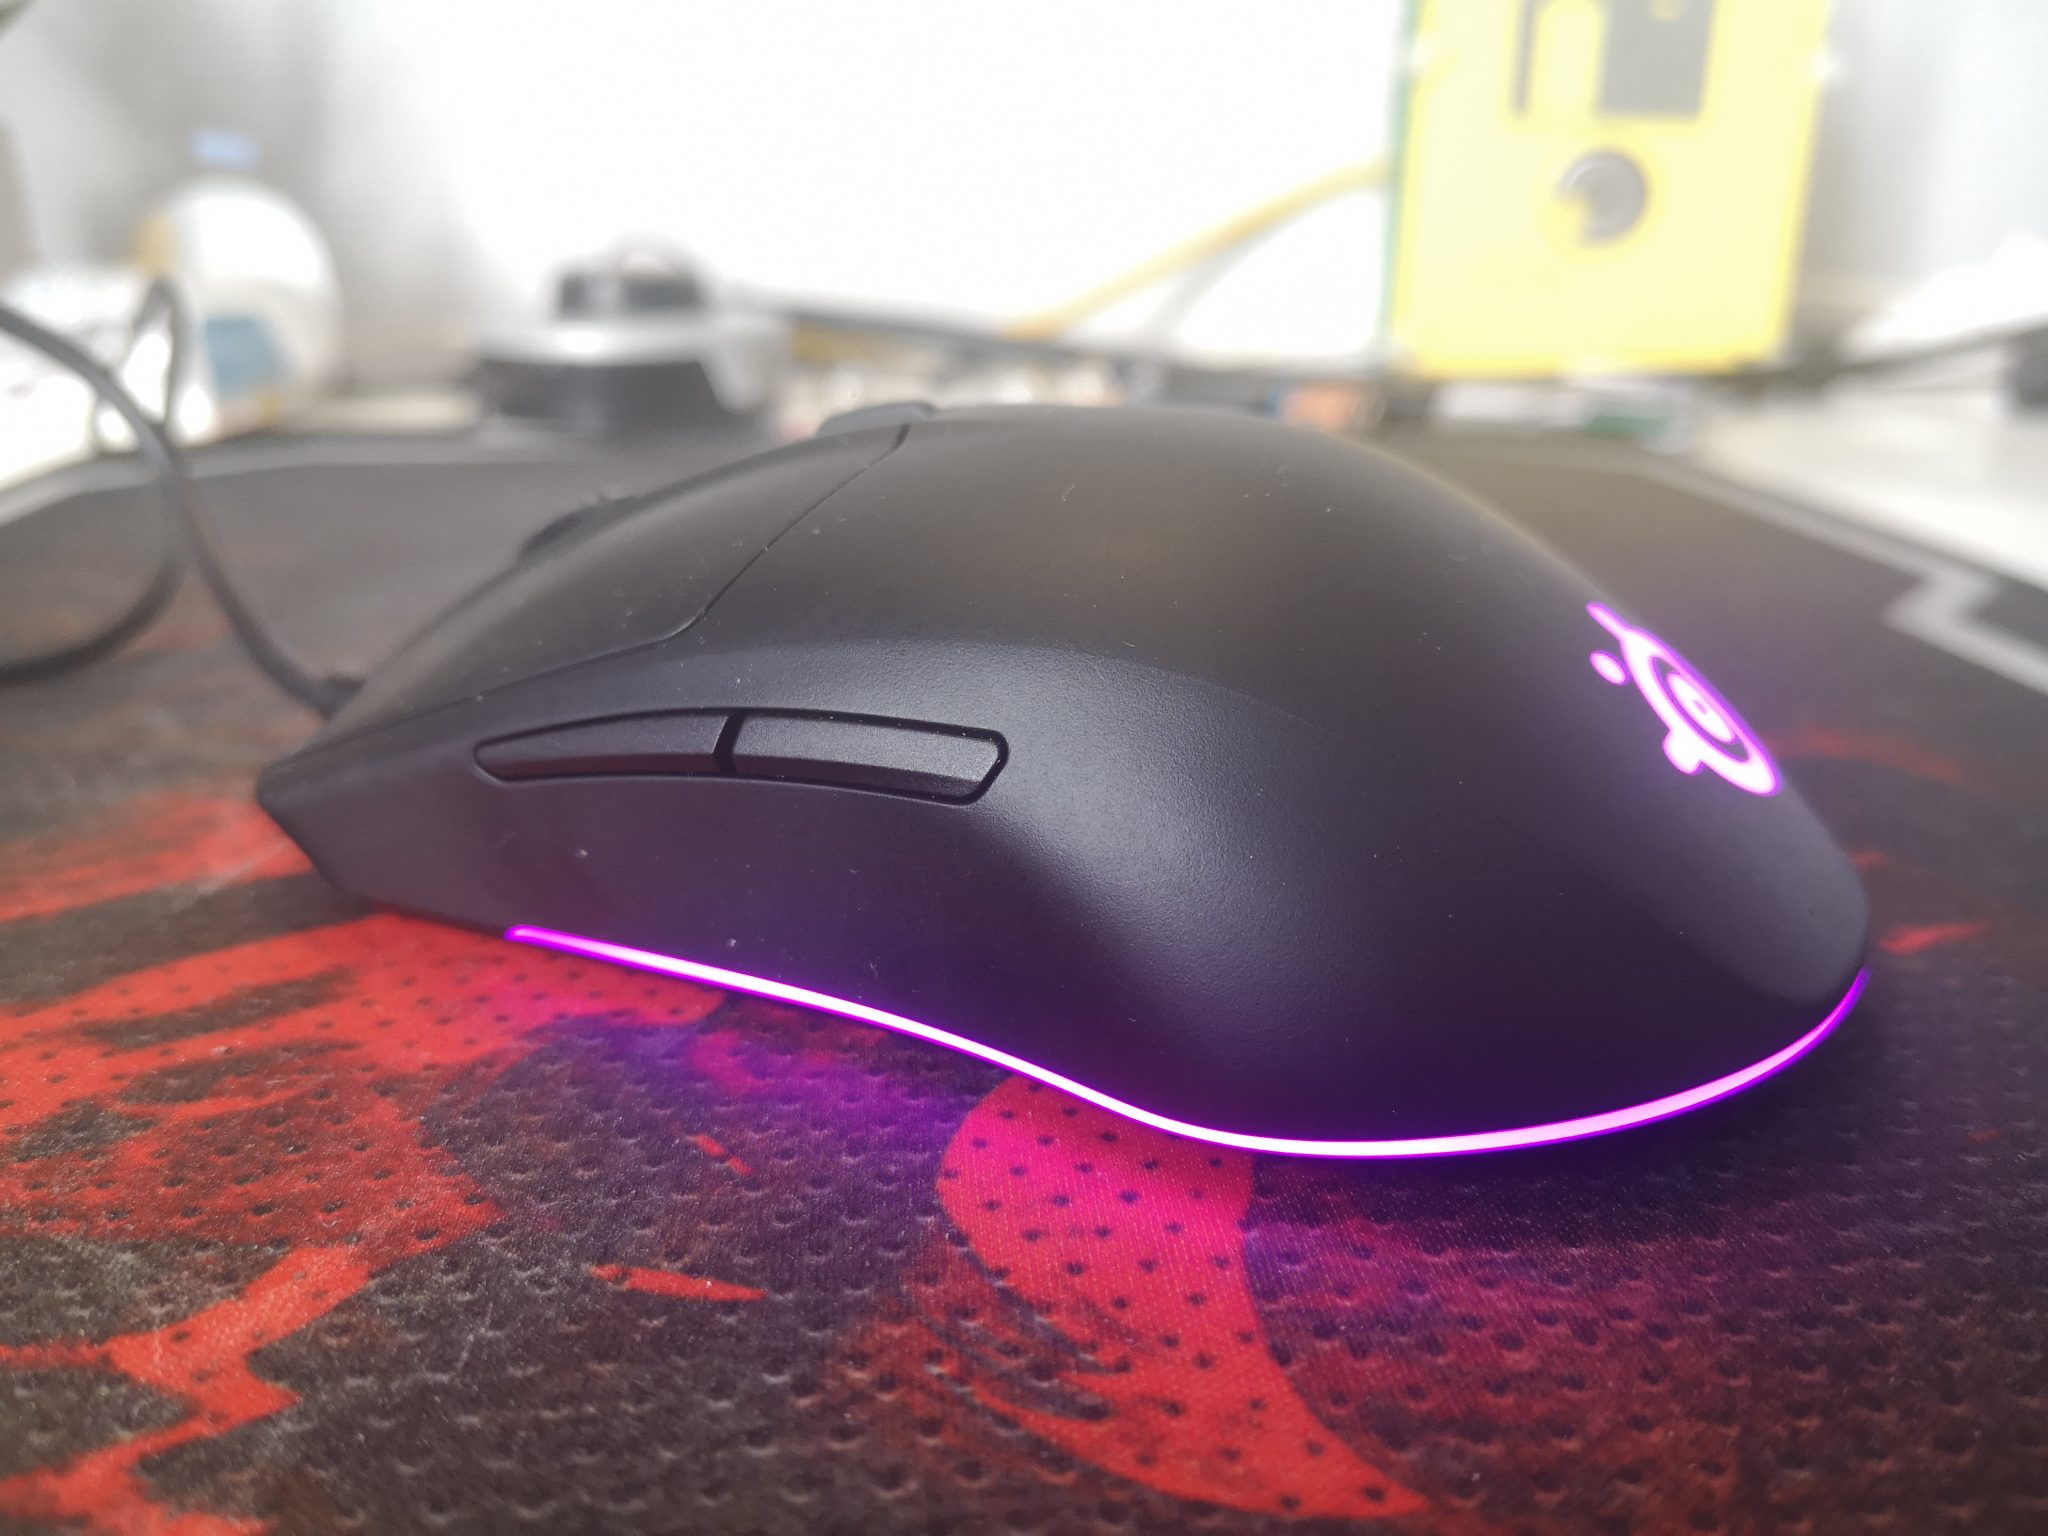 Steelseries souris 1 scaled 2